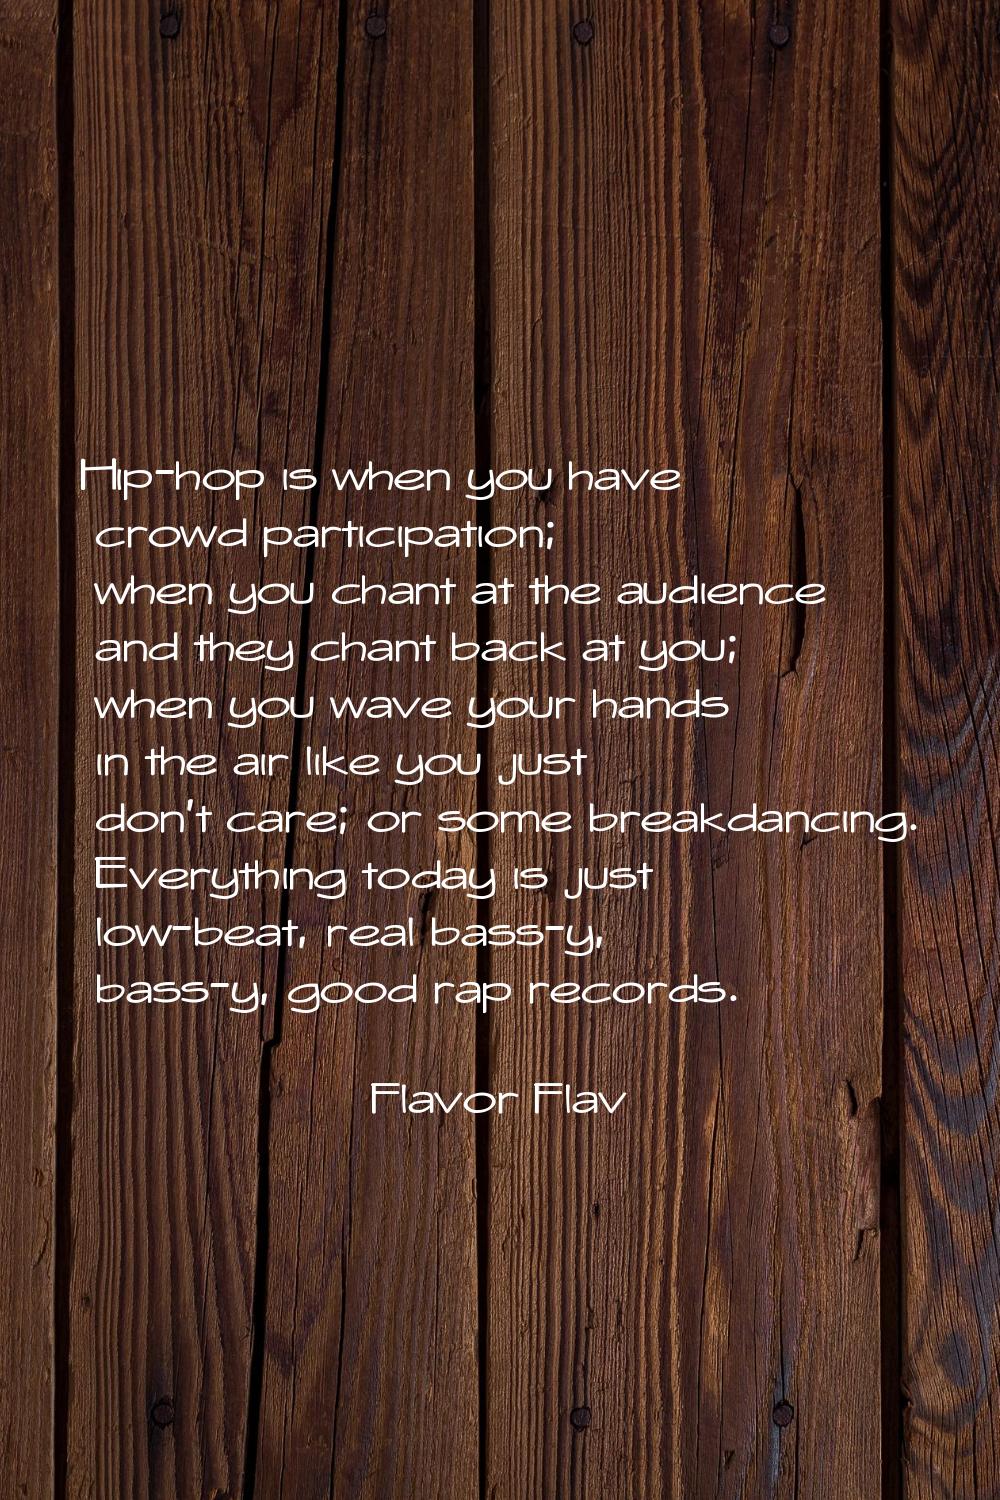 Hip-hop is when you have crowd participation; when you chant at the audience and they chant back at